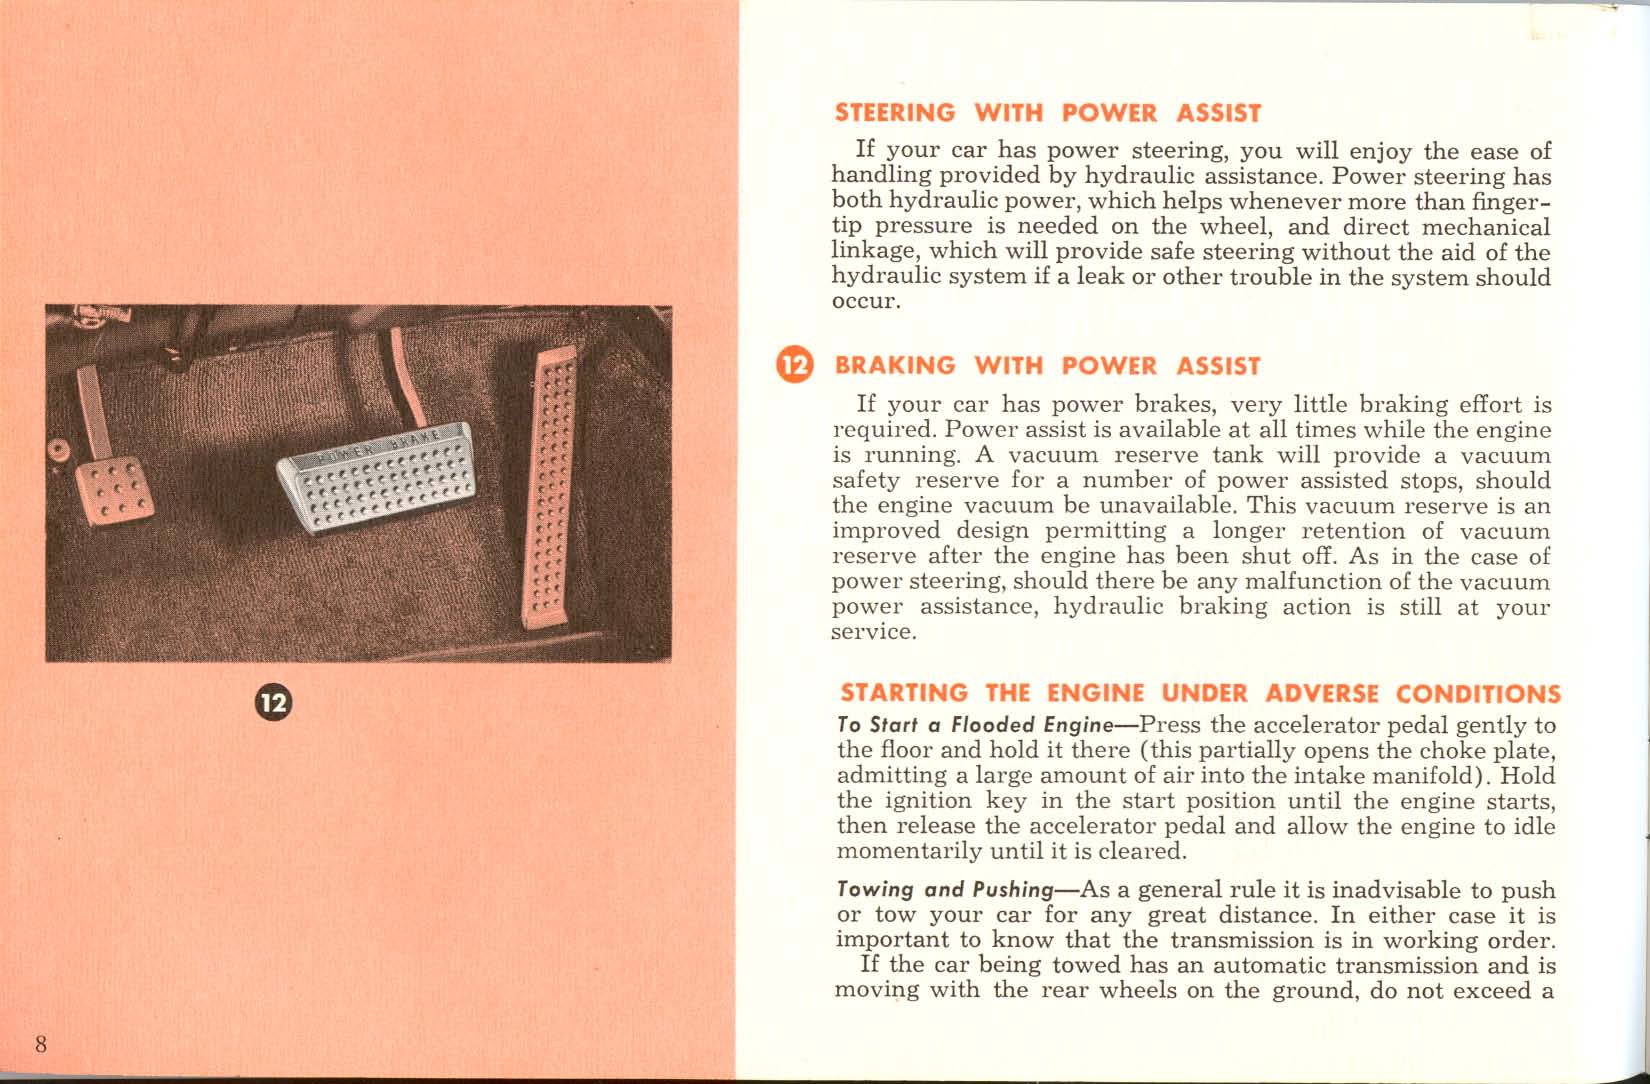 1961 Mercury Owners Manual Page 26